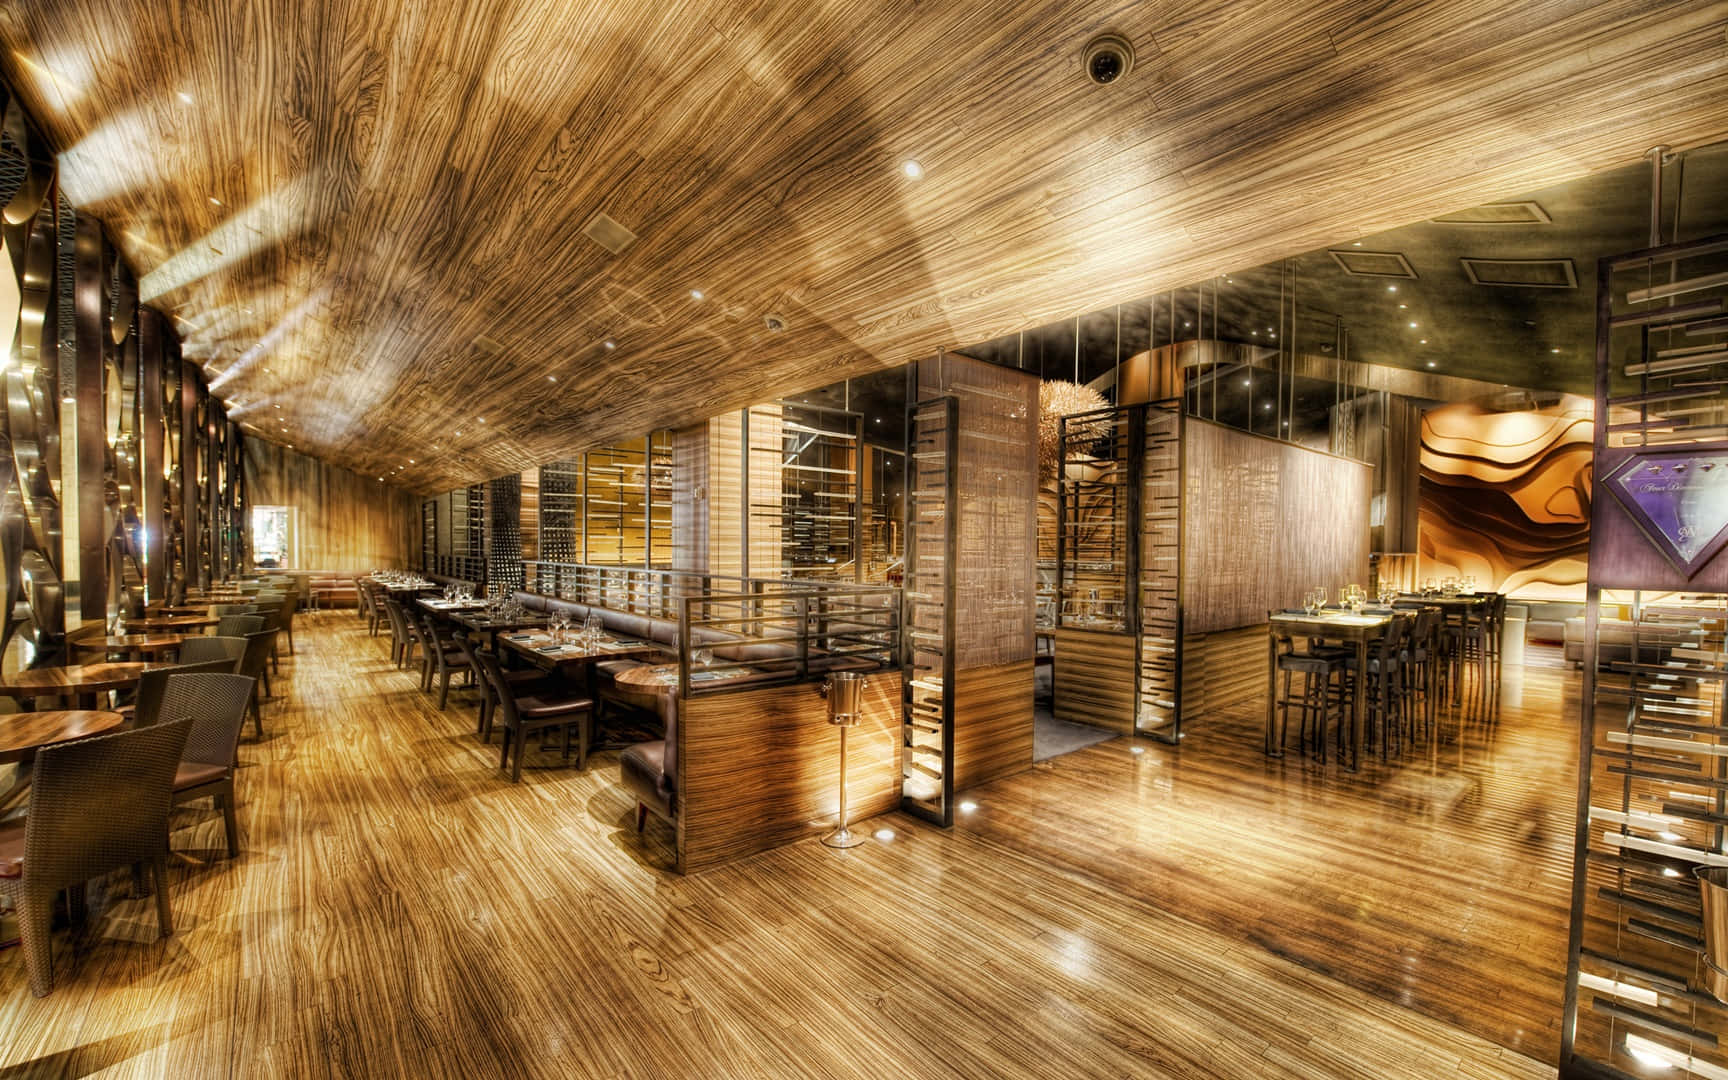 A Restaurant With Wooden Floors And Wooden Walls